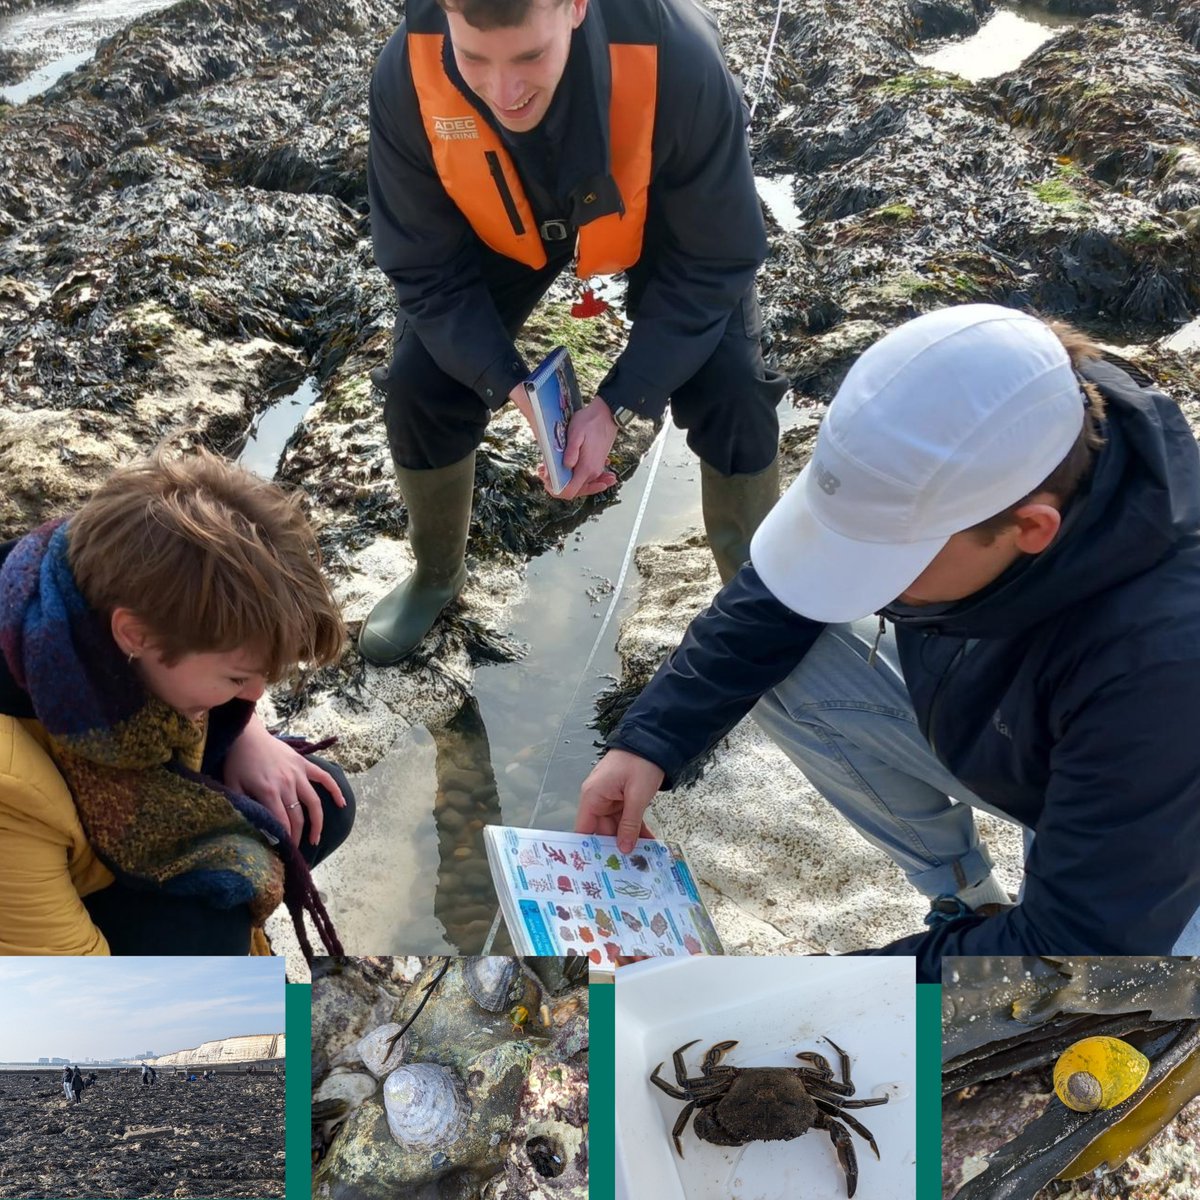 Last week, officers joined students from the @uniofbrighton in their rocky shore practical survey. Comparing the biodiversity in quadrats across the upper, mid, and lower zones of the intertidal area. The site surveyed lies within Beachy Head West Marine Conservation Zone.